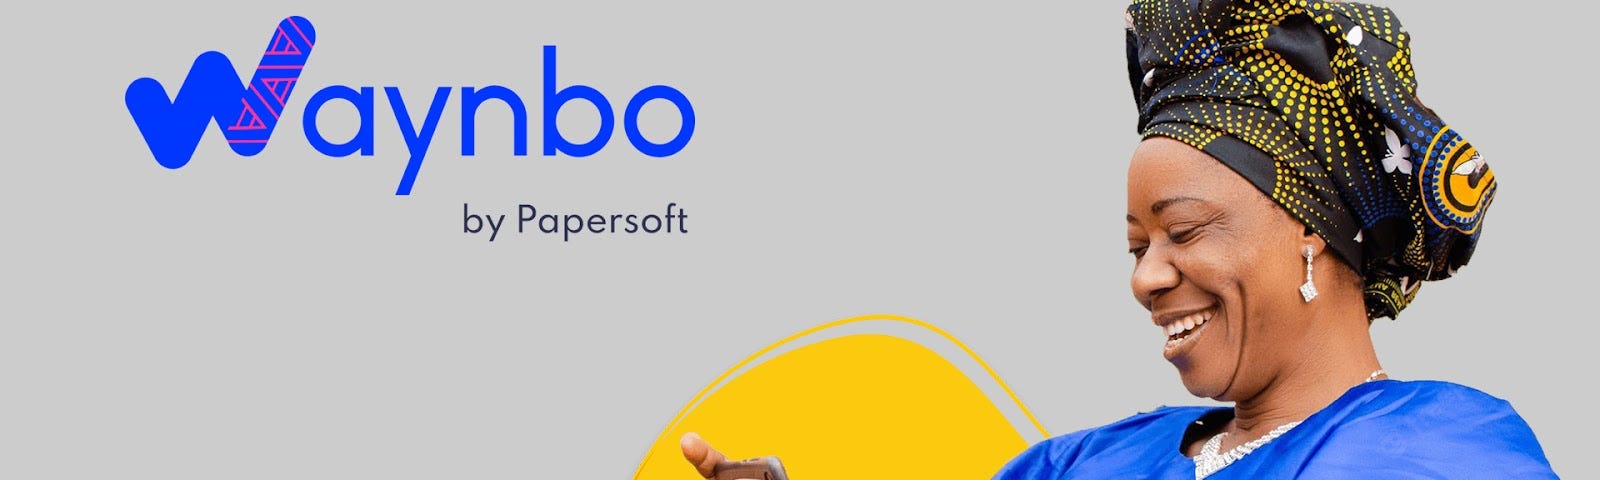 Title Image for Waynbo by Papersoft — Shared Agent Network. Depicts a Nigerian woman with a smartphone.